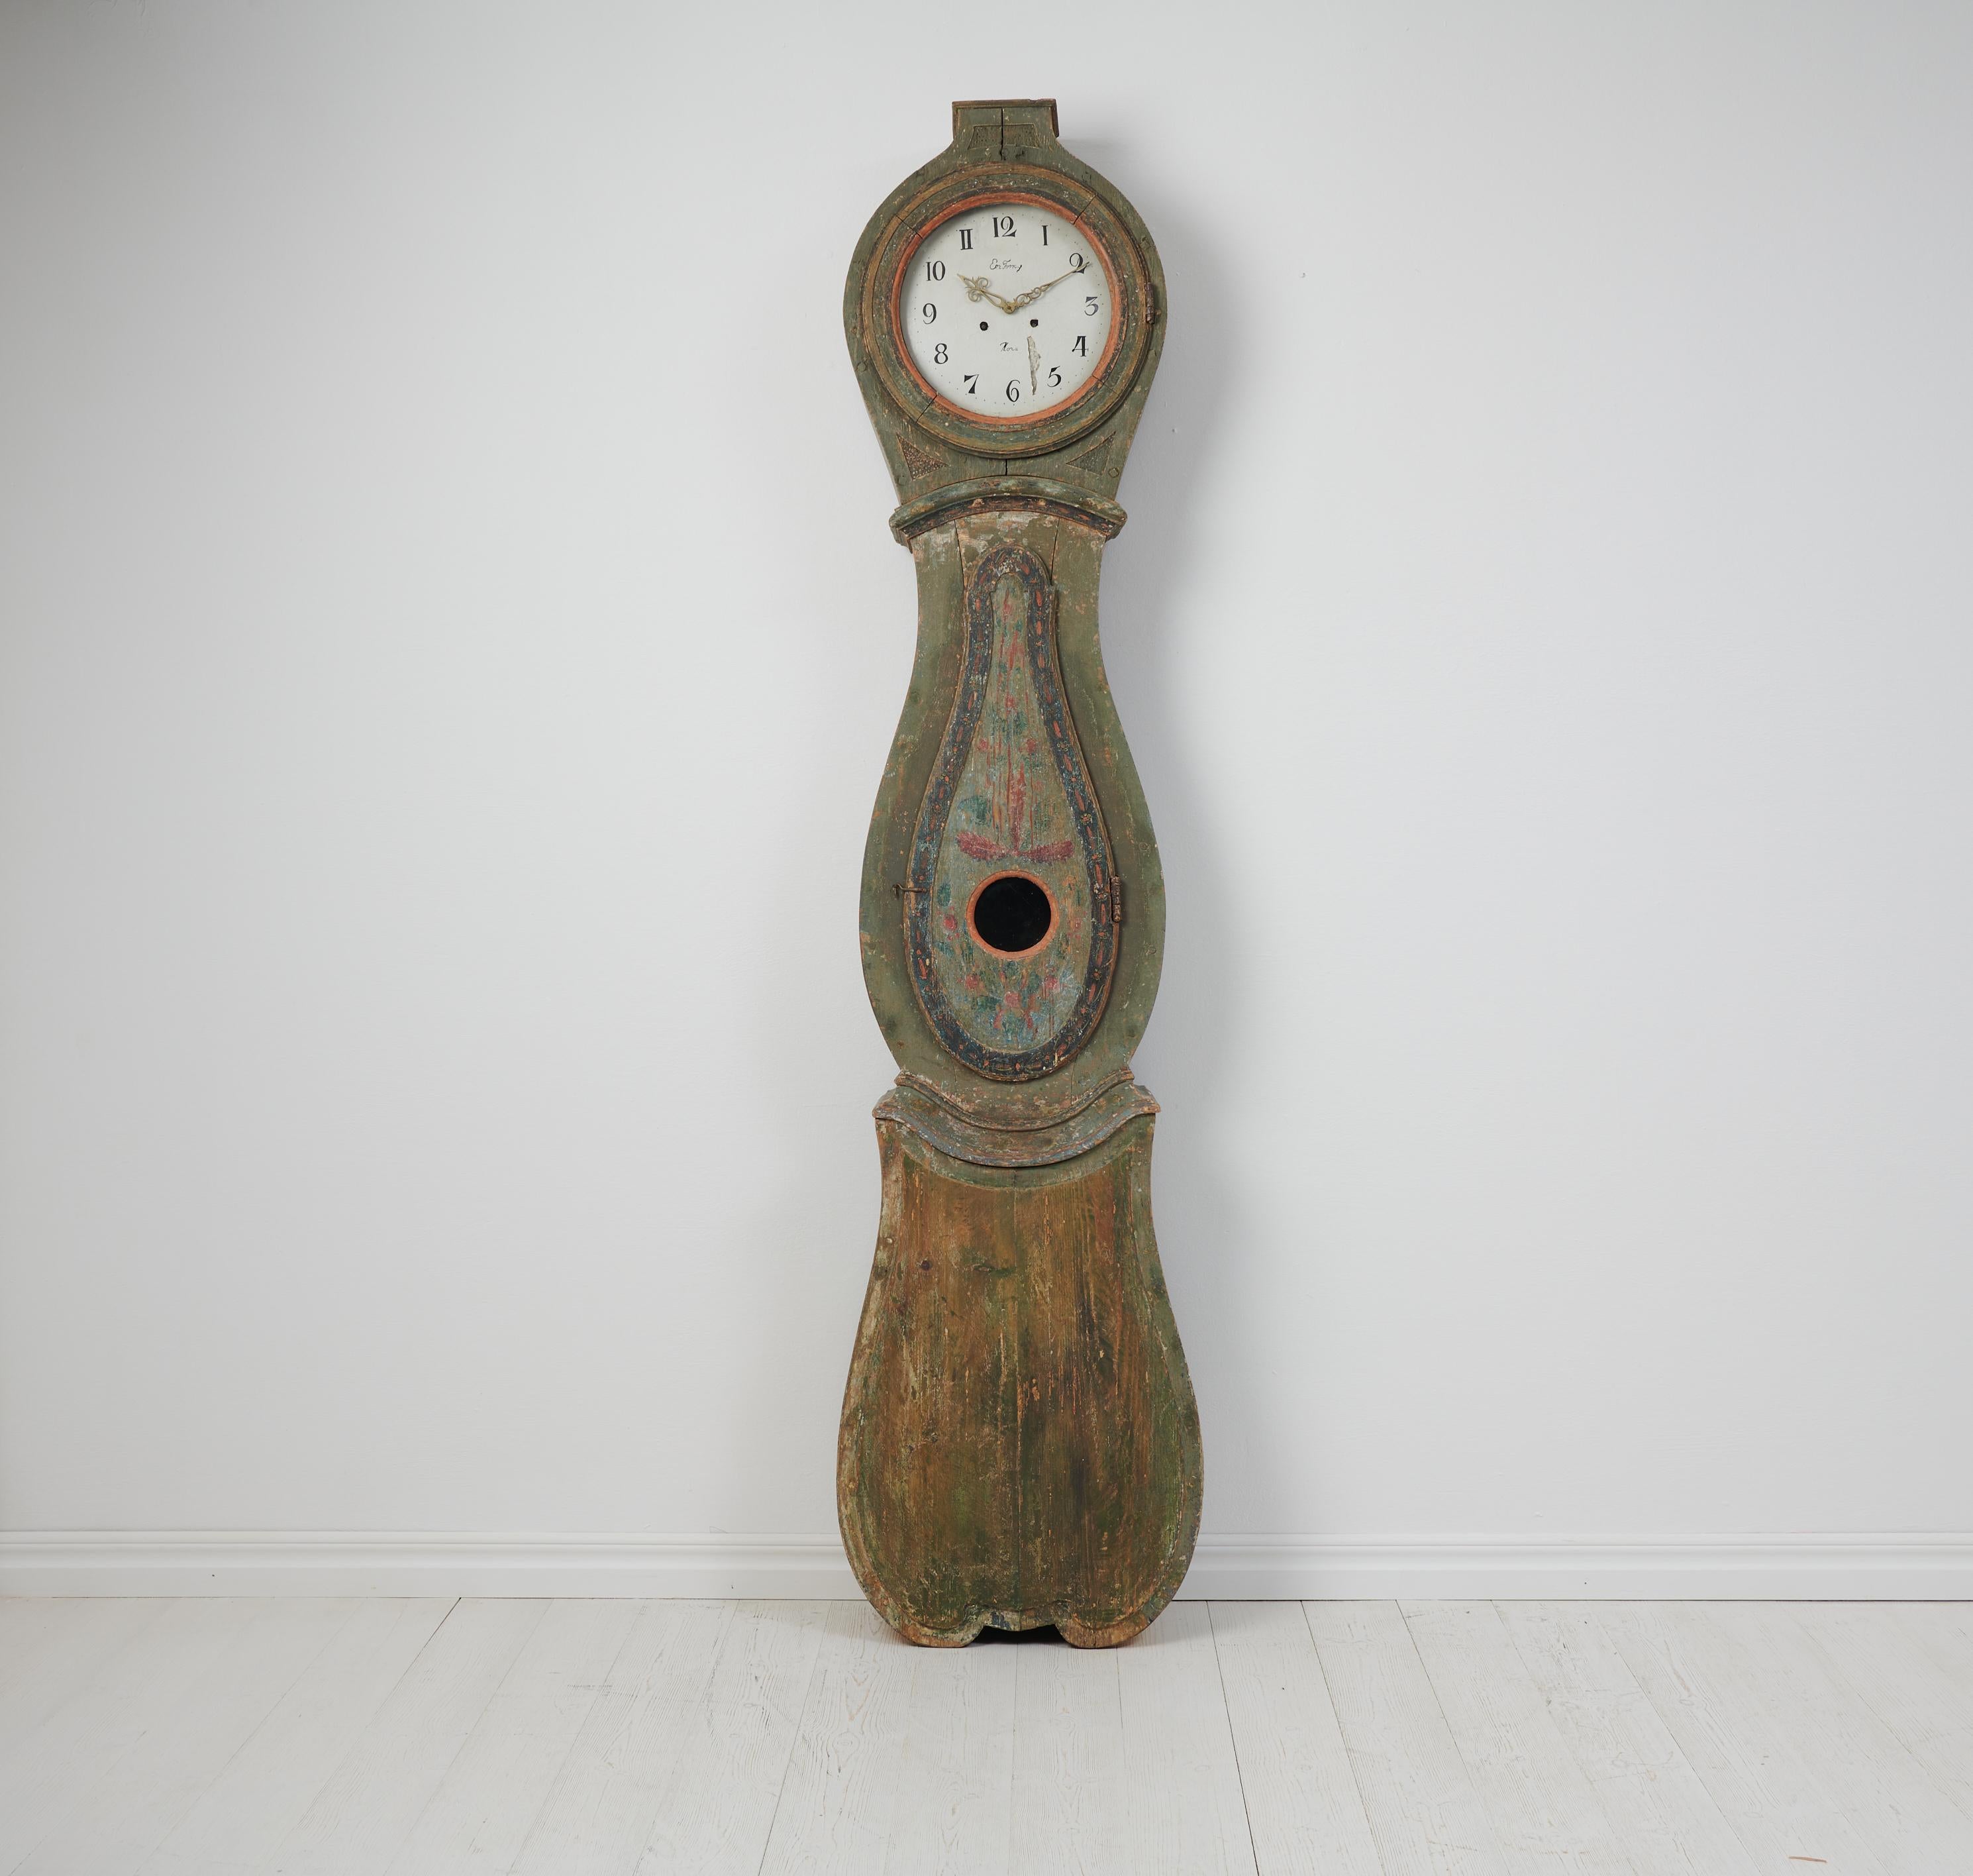 Country long case clock from Sweden made during the 19th century, around 1820 to 1840. The clock is an antique northern Swedish country furniture made in solid Swedish pine. The clock has a genuine case in a classic rococo shape with the original